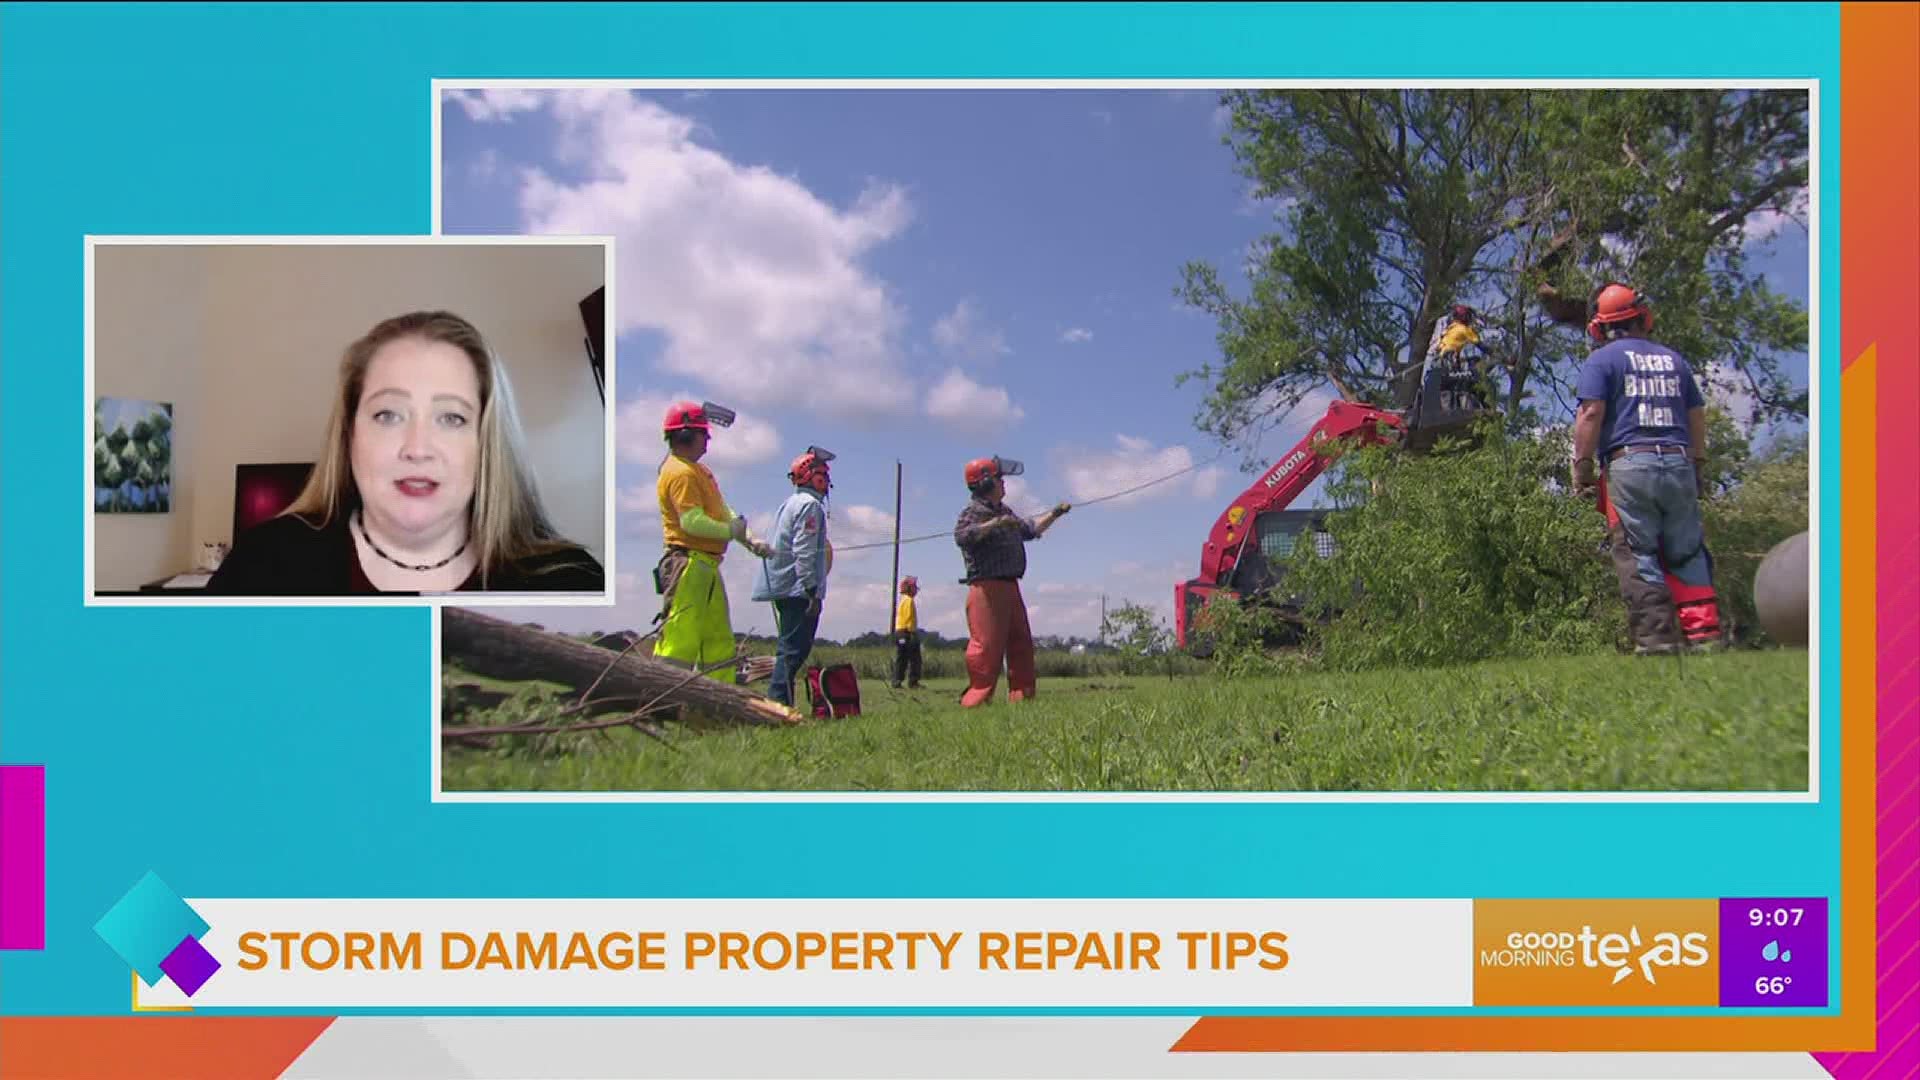 Amy Rasor of the Better Business Bureau in Fort Worth breaks down what you need to know when hiring a contractor or landscaper for storm damage repairs